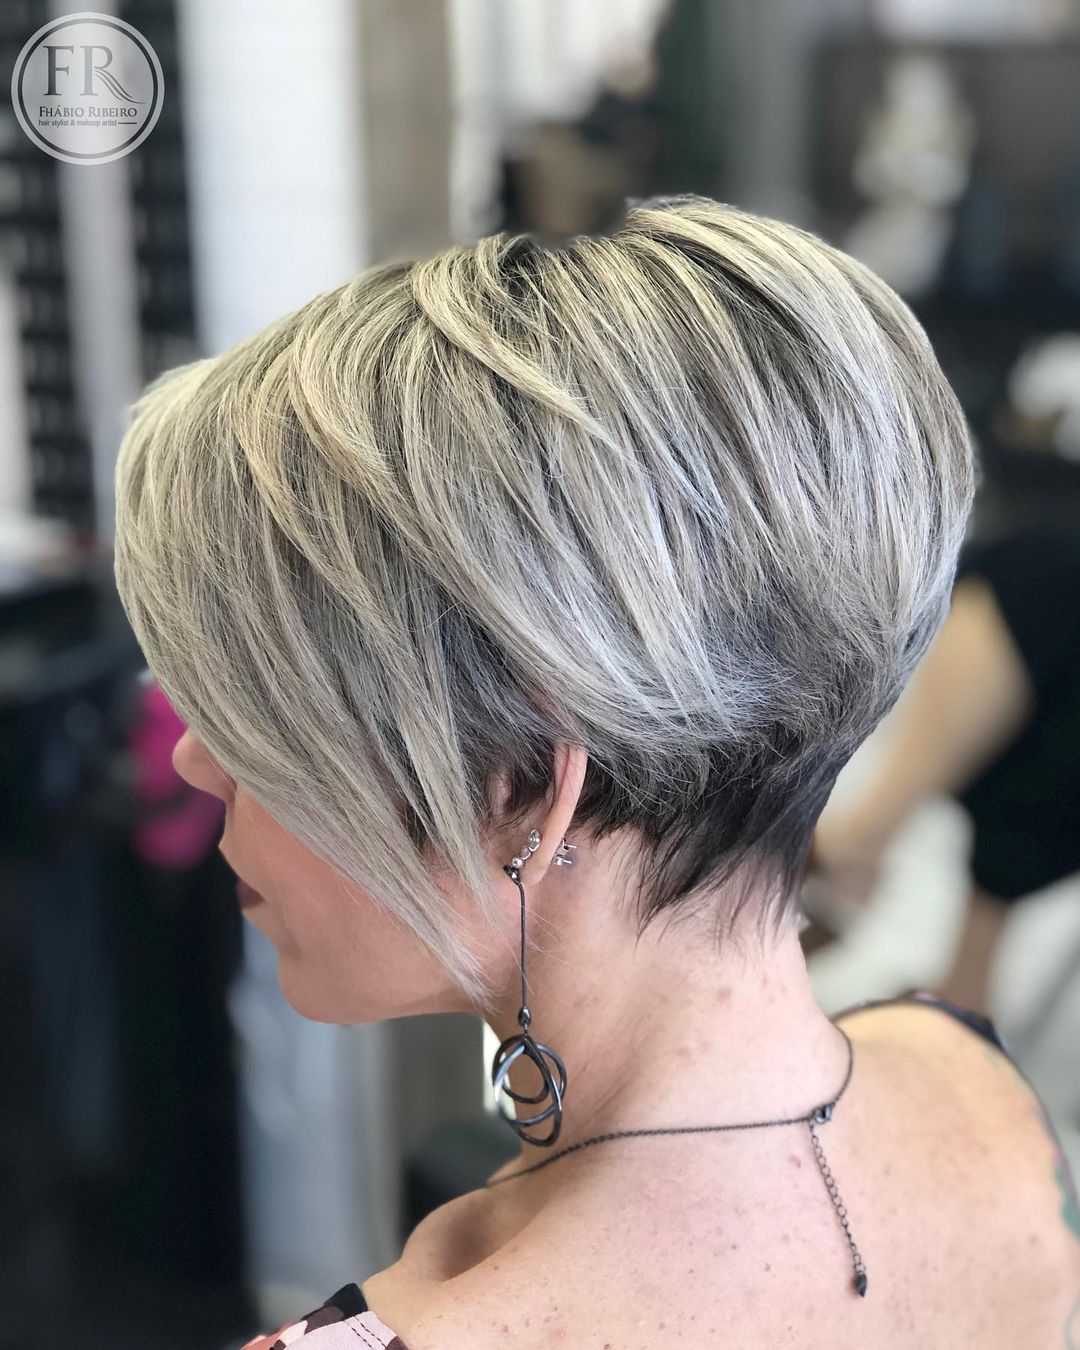 Textured Cut for Very Short Thick Hair